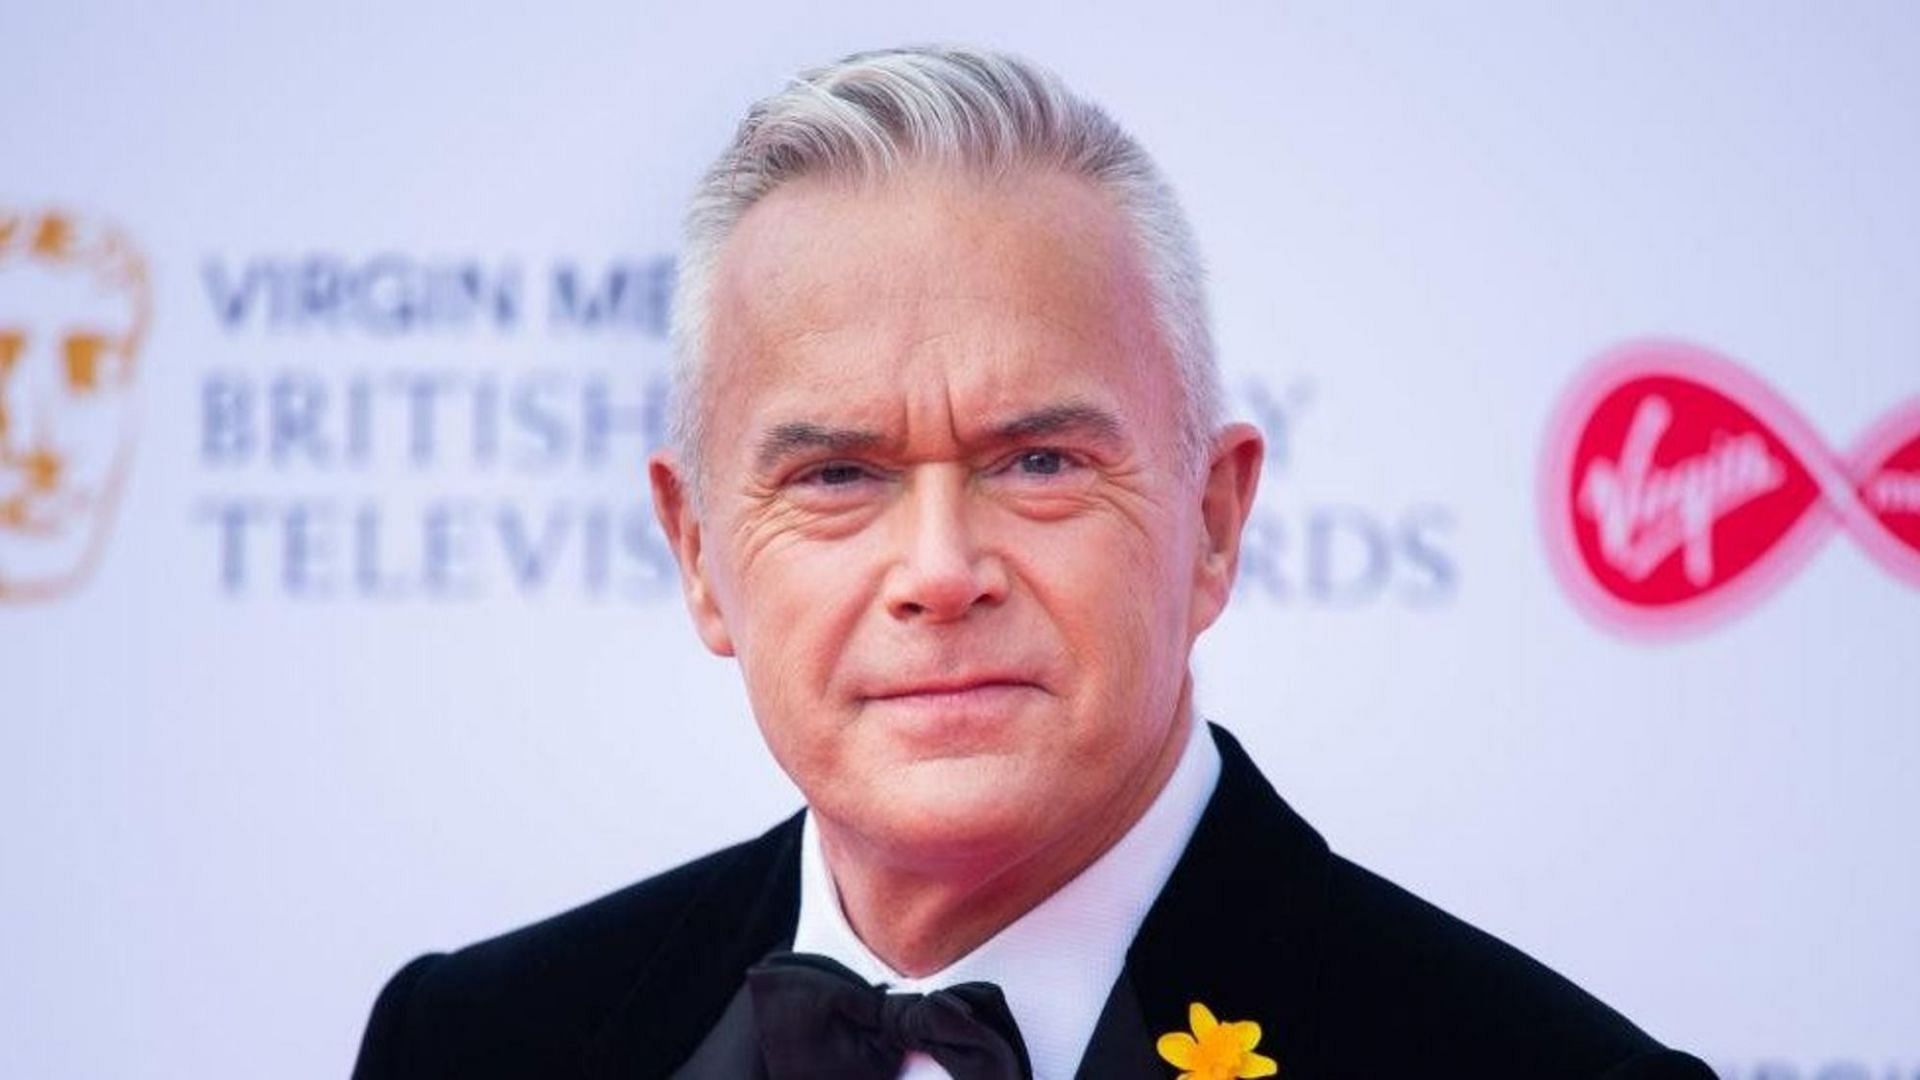 Theories of Huw Edwards in Priory mental health center slammed online (Image via AP)